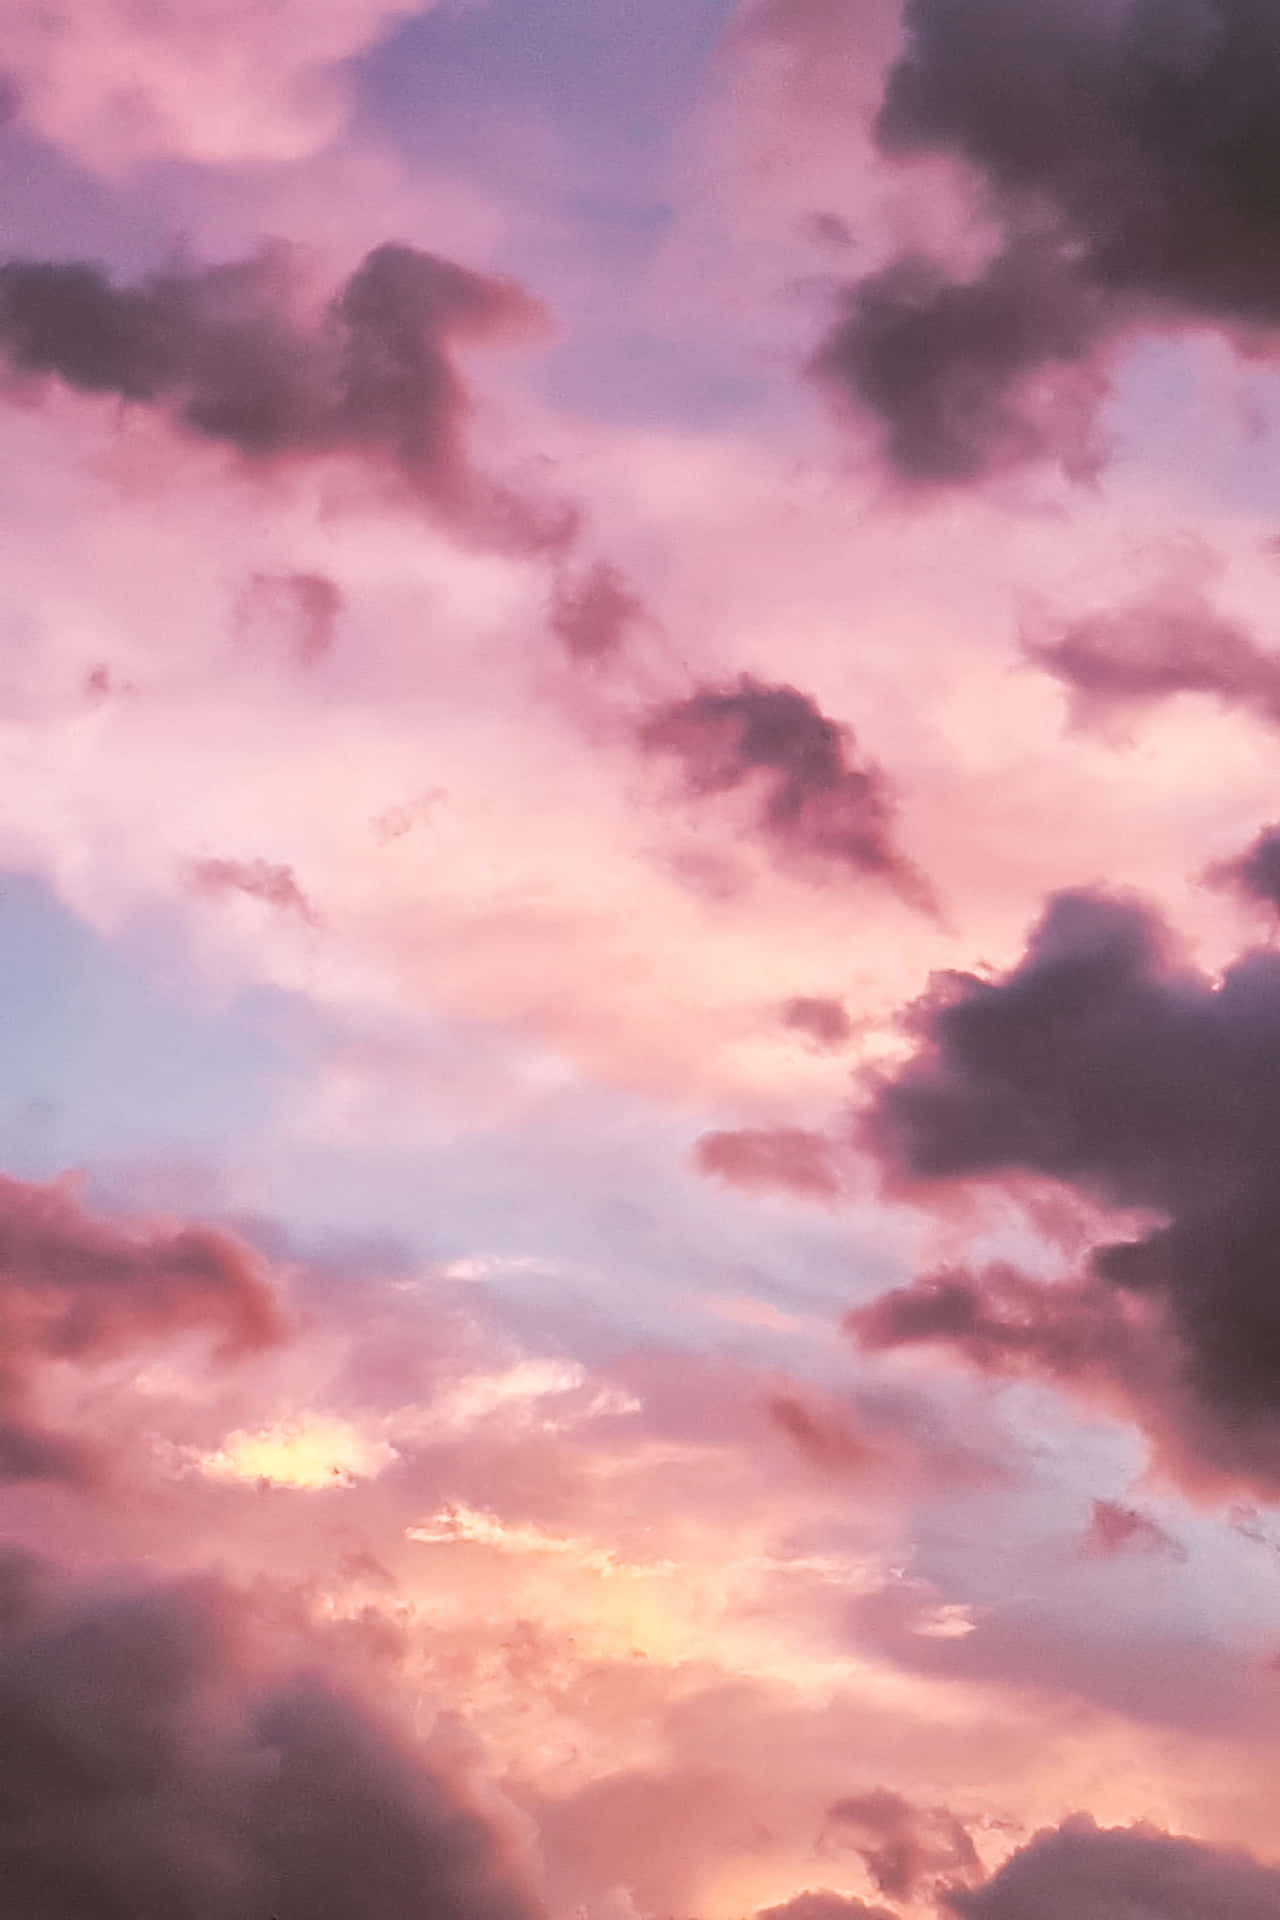 Aesthetic Clouds: A Sky Filled with Serenity